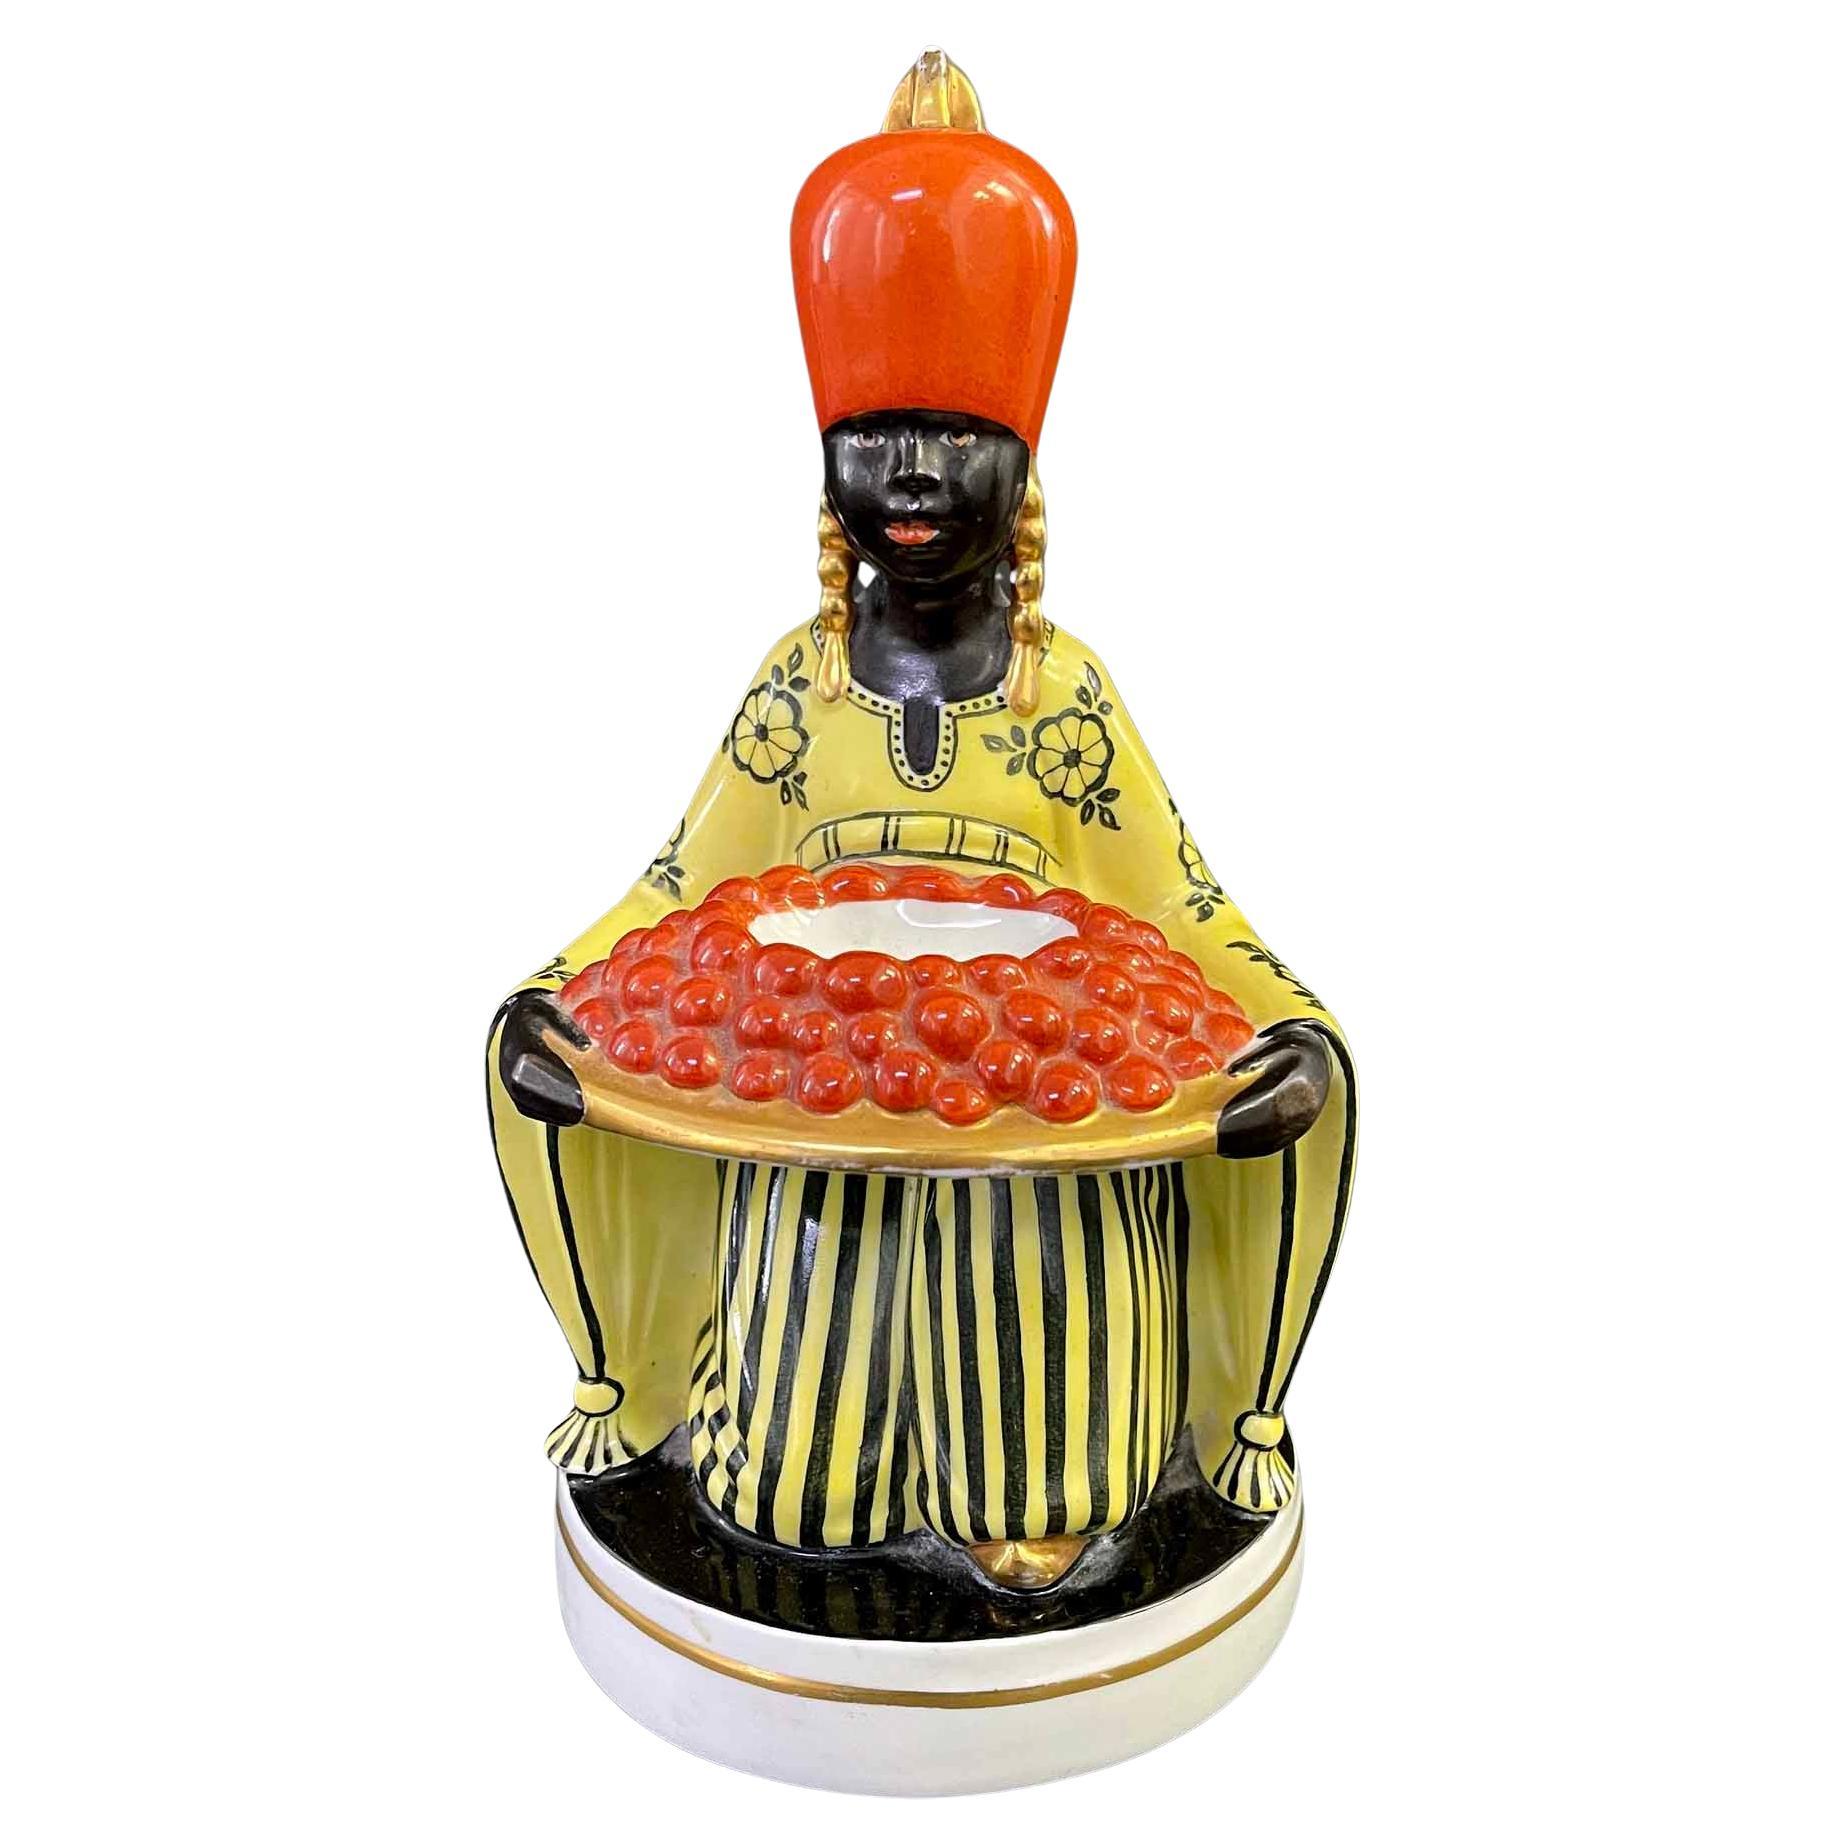 "Tray of Oranges", Rare Art Deco Perfume Warmer w/ North African Figure For Sale